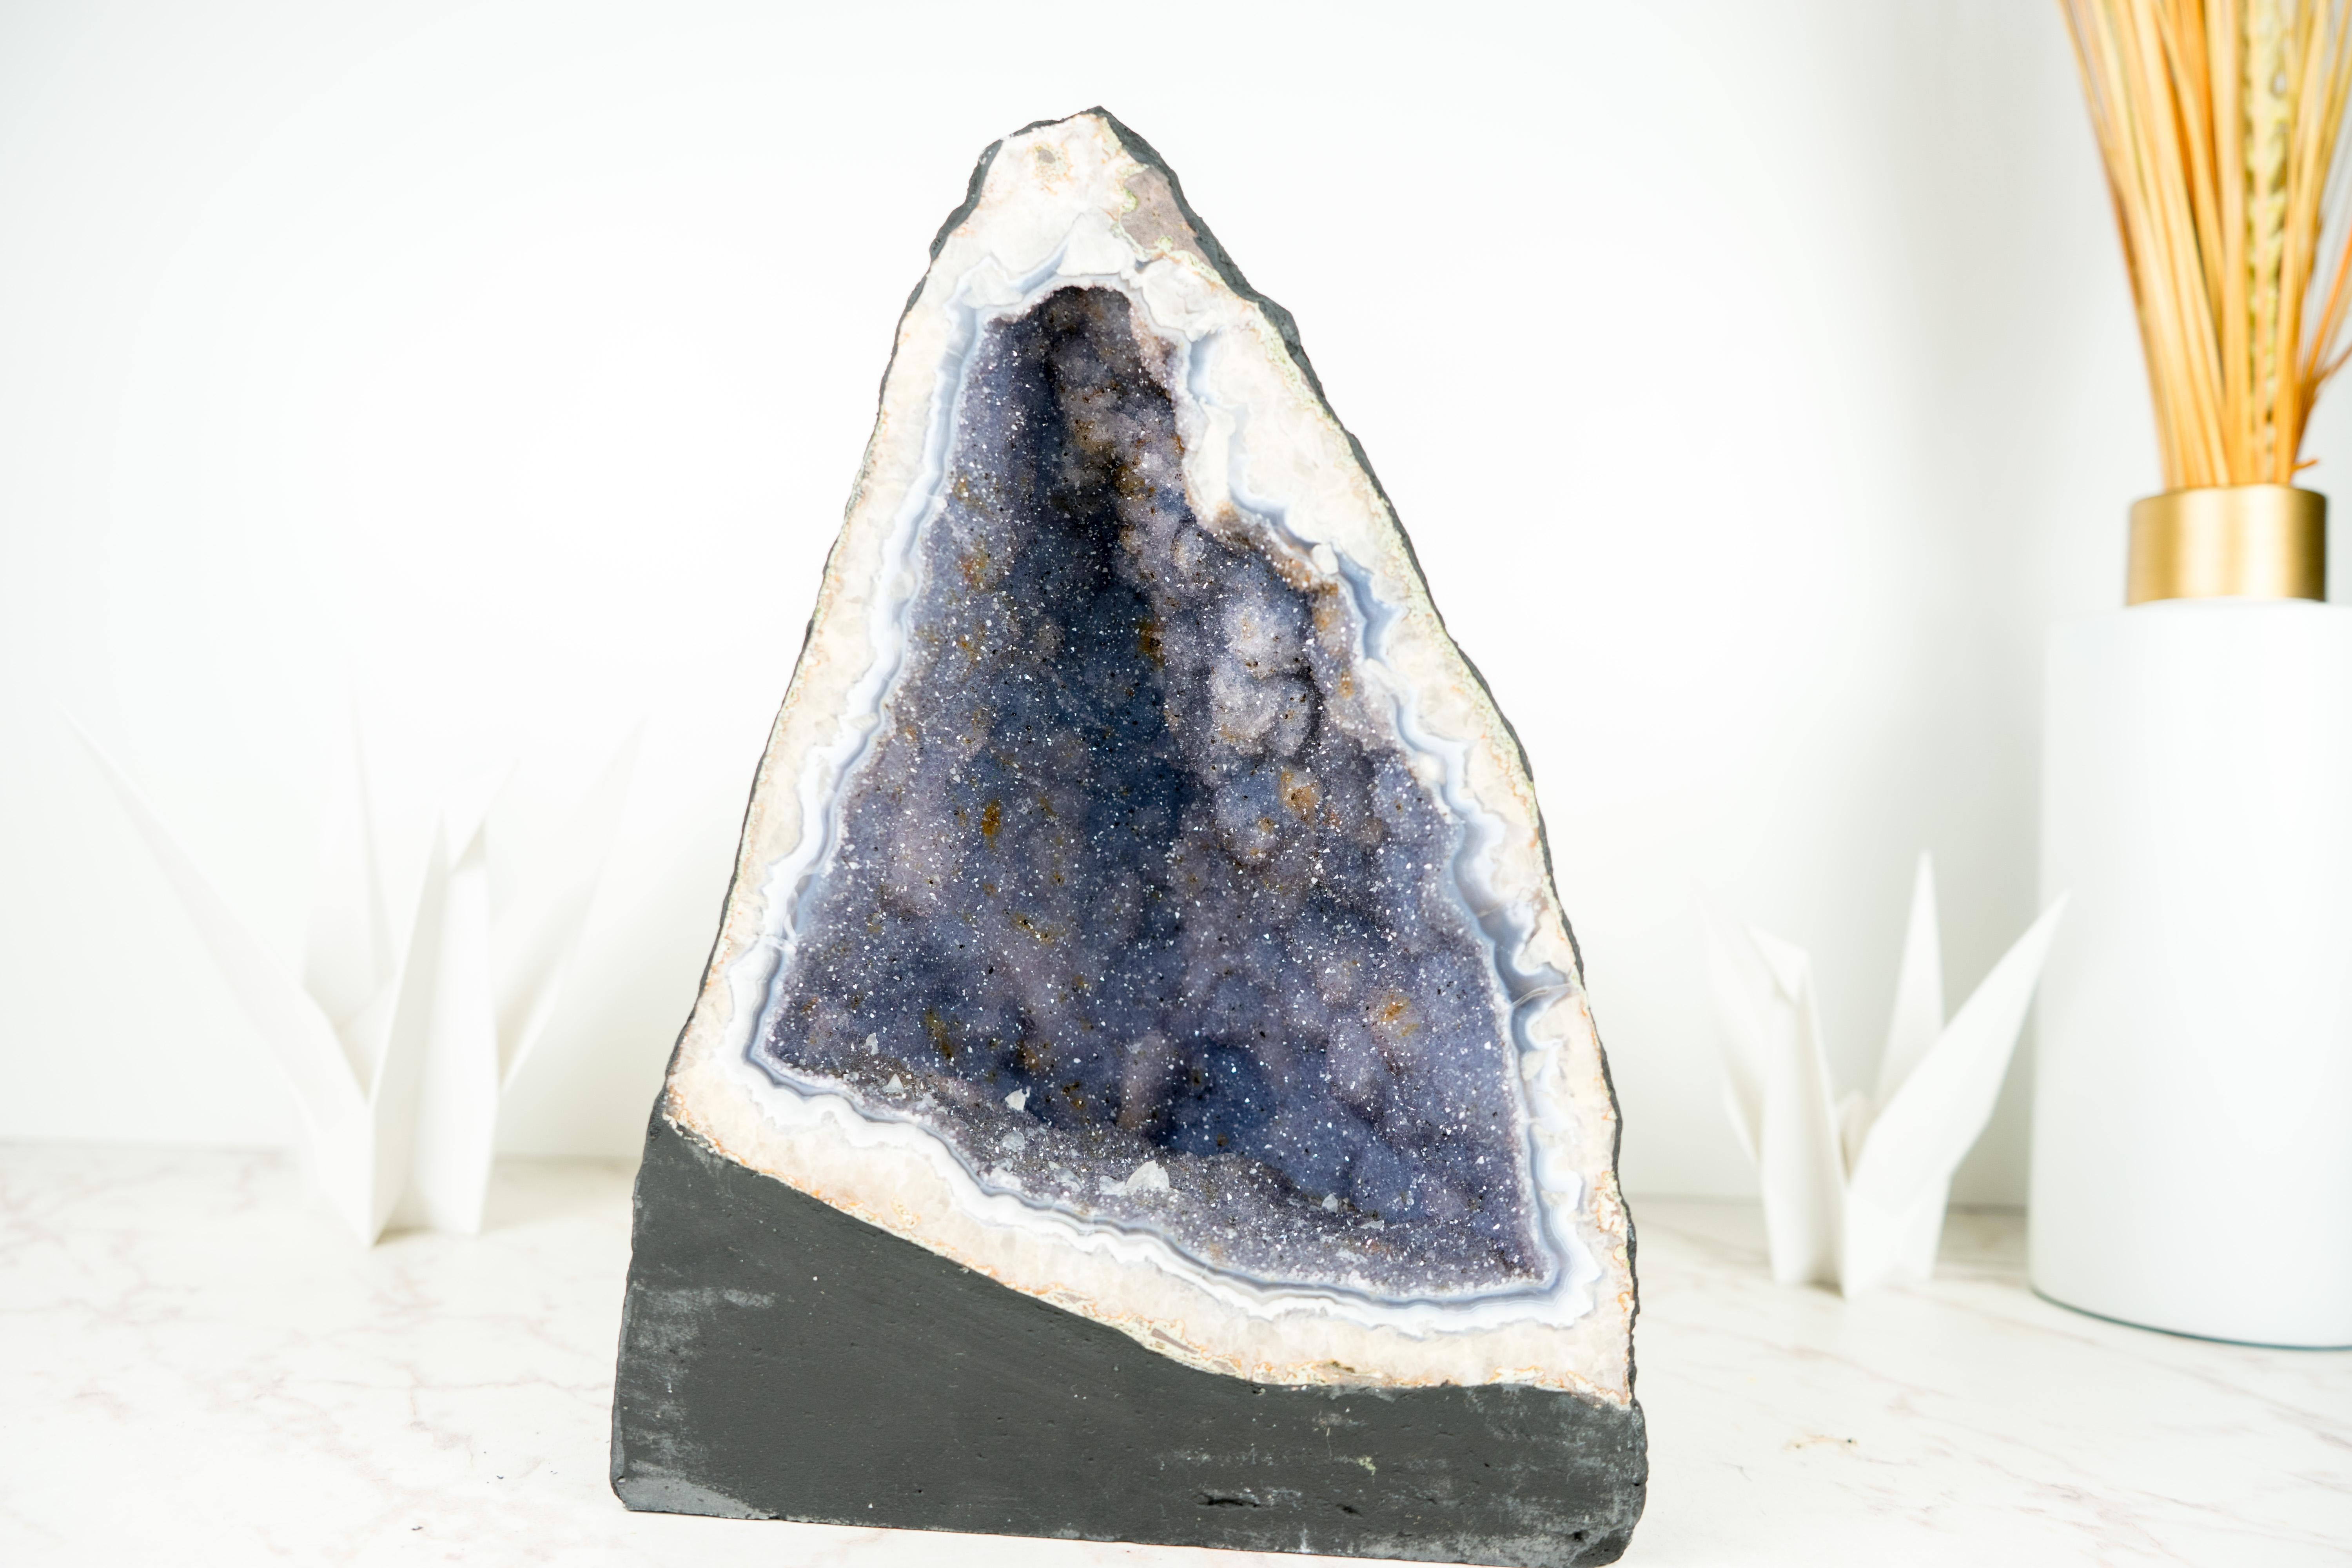 Rare Agate Amethyst Geode, with Lavender Galaxy Amethyst Druzy and Calcite

▫️ Description

A natural Agate Geode with rare characteristics forms a truly natural artwork. Blue and white agate bandings, lavender galaxy druzy, and the perfection of